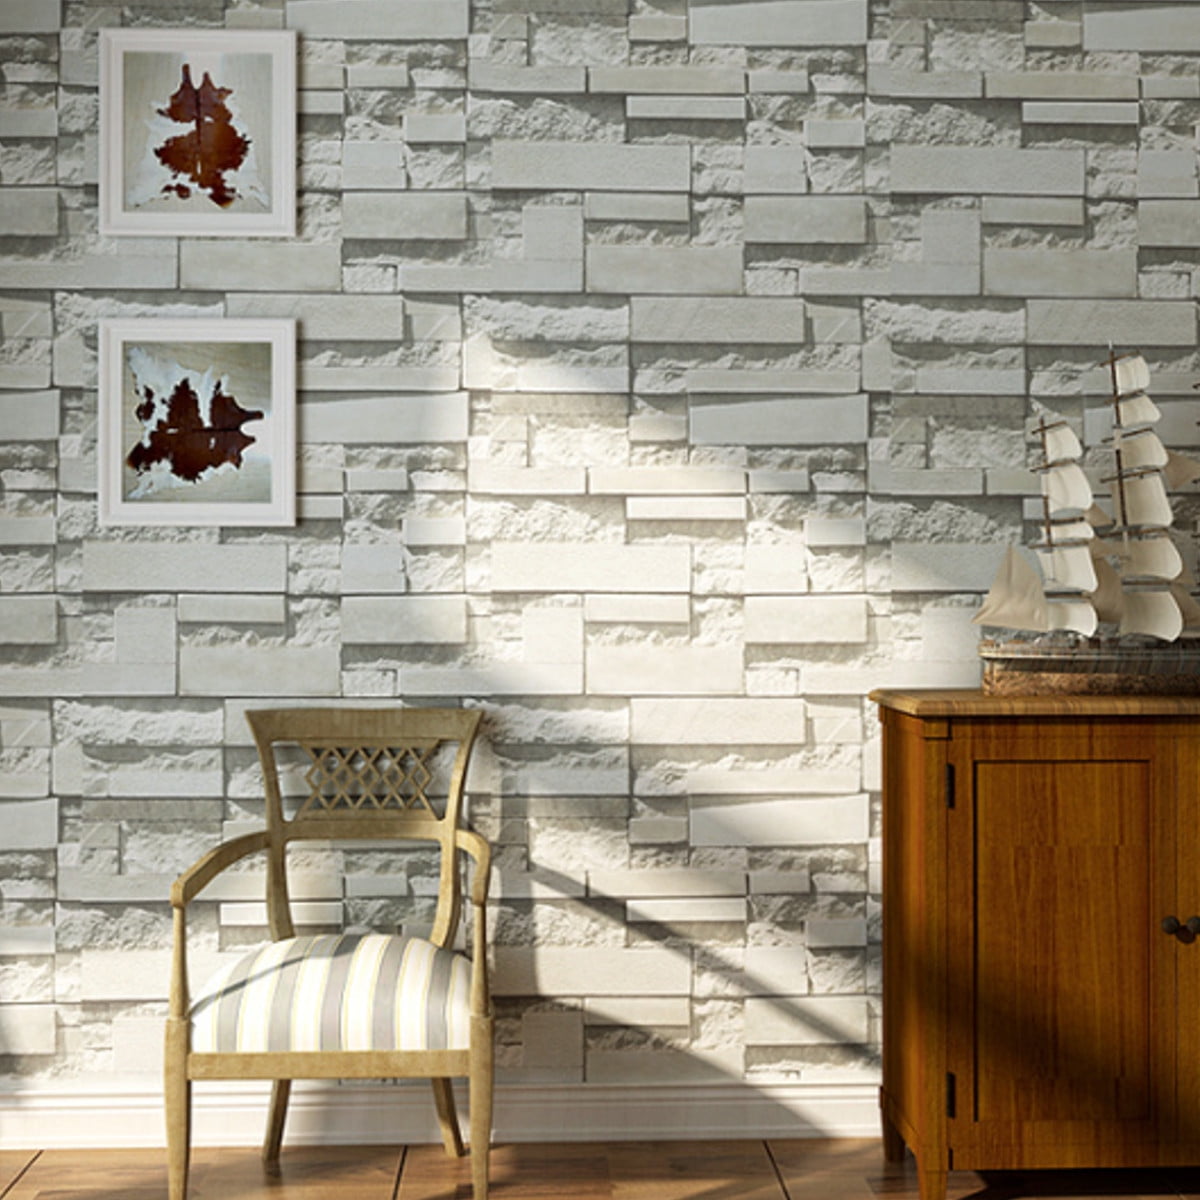 Bedroom Background Textured 10M 3D Mural Modern Stone Brick Wall Paper 